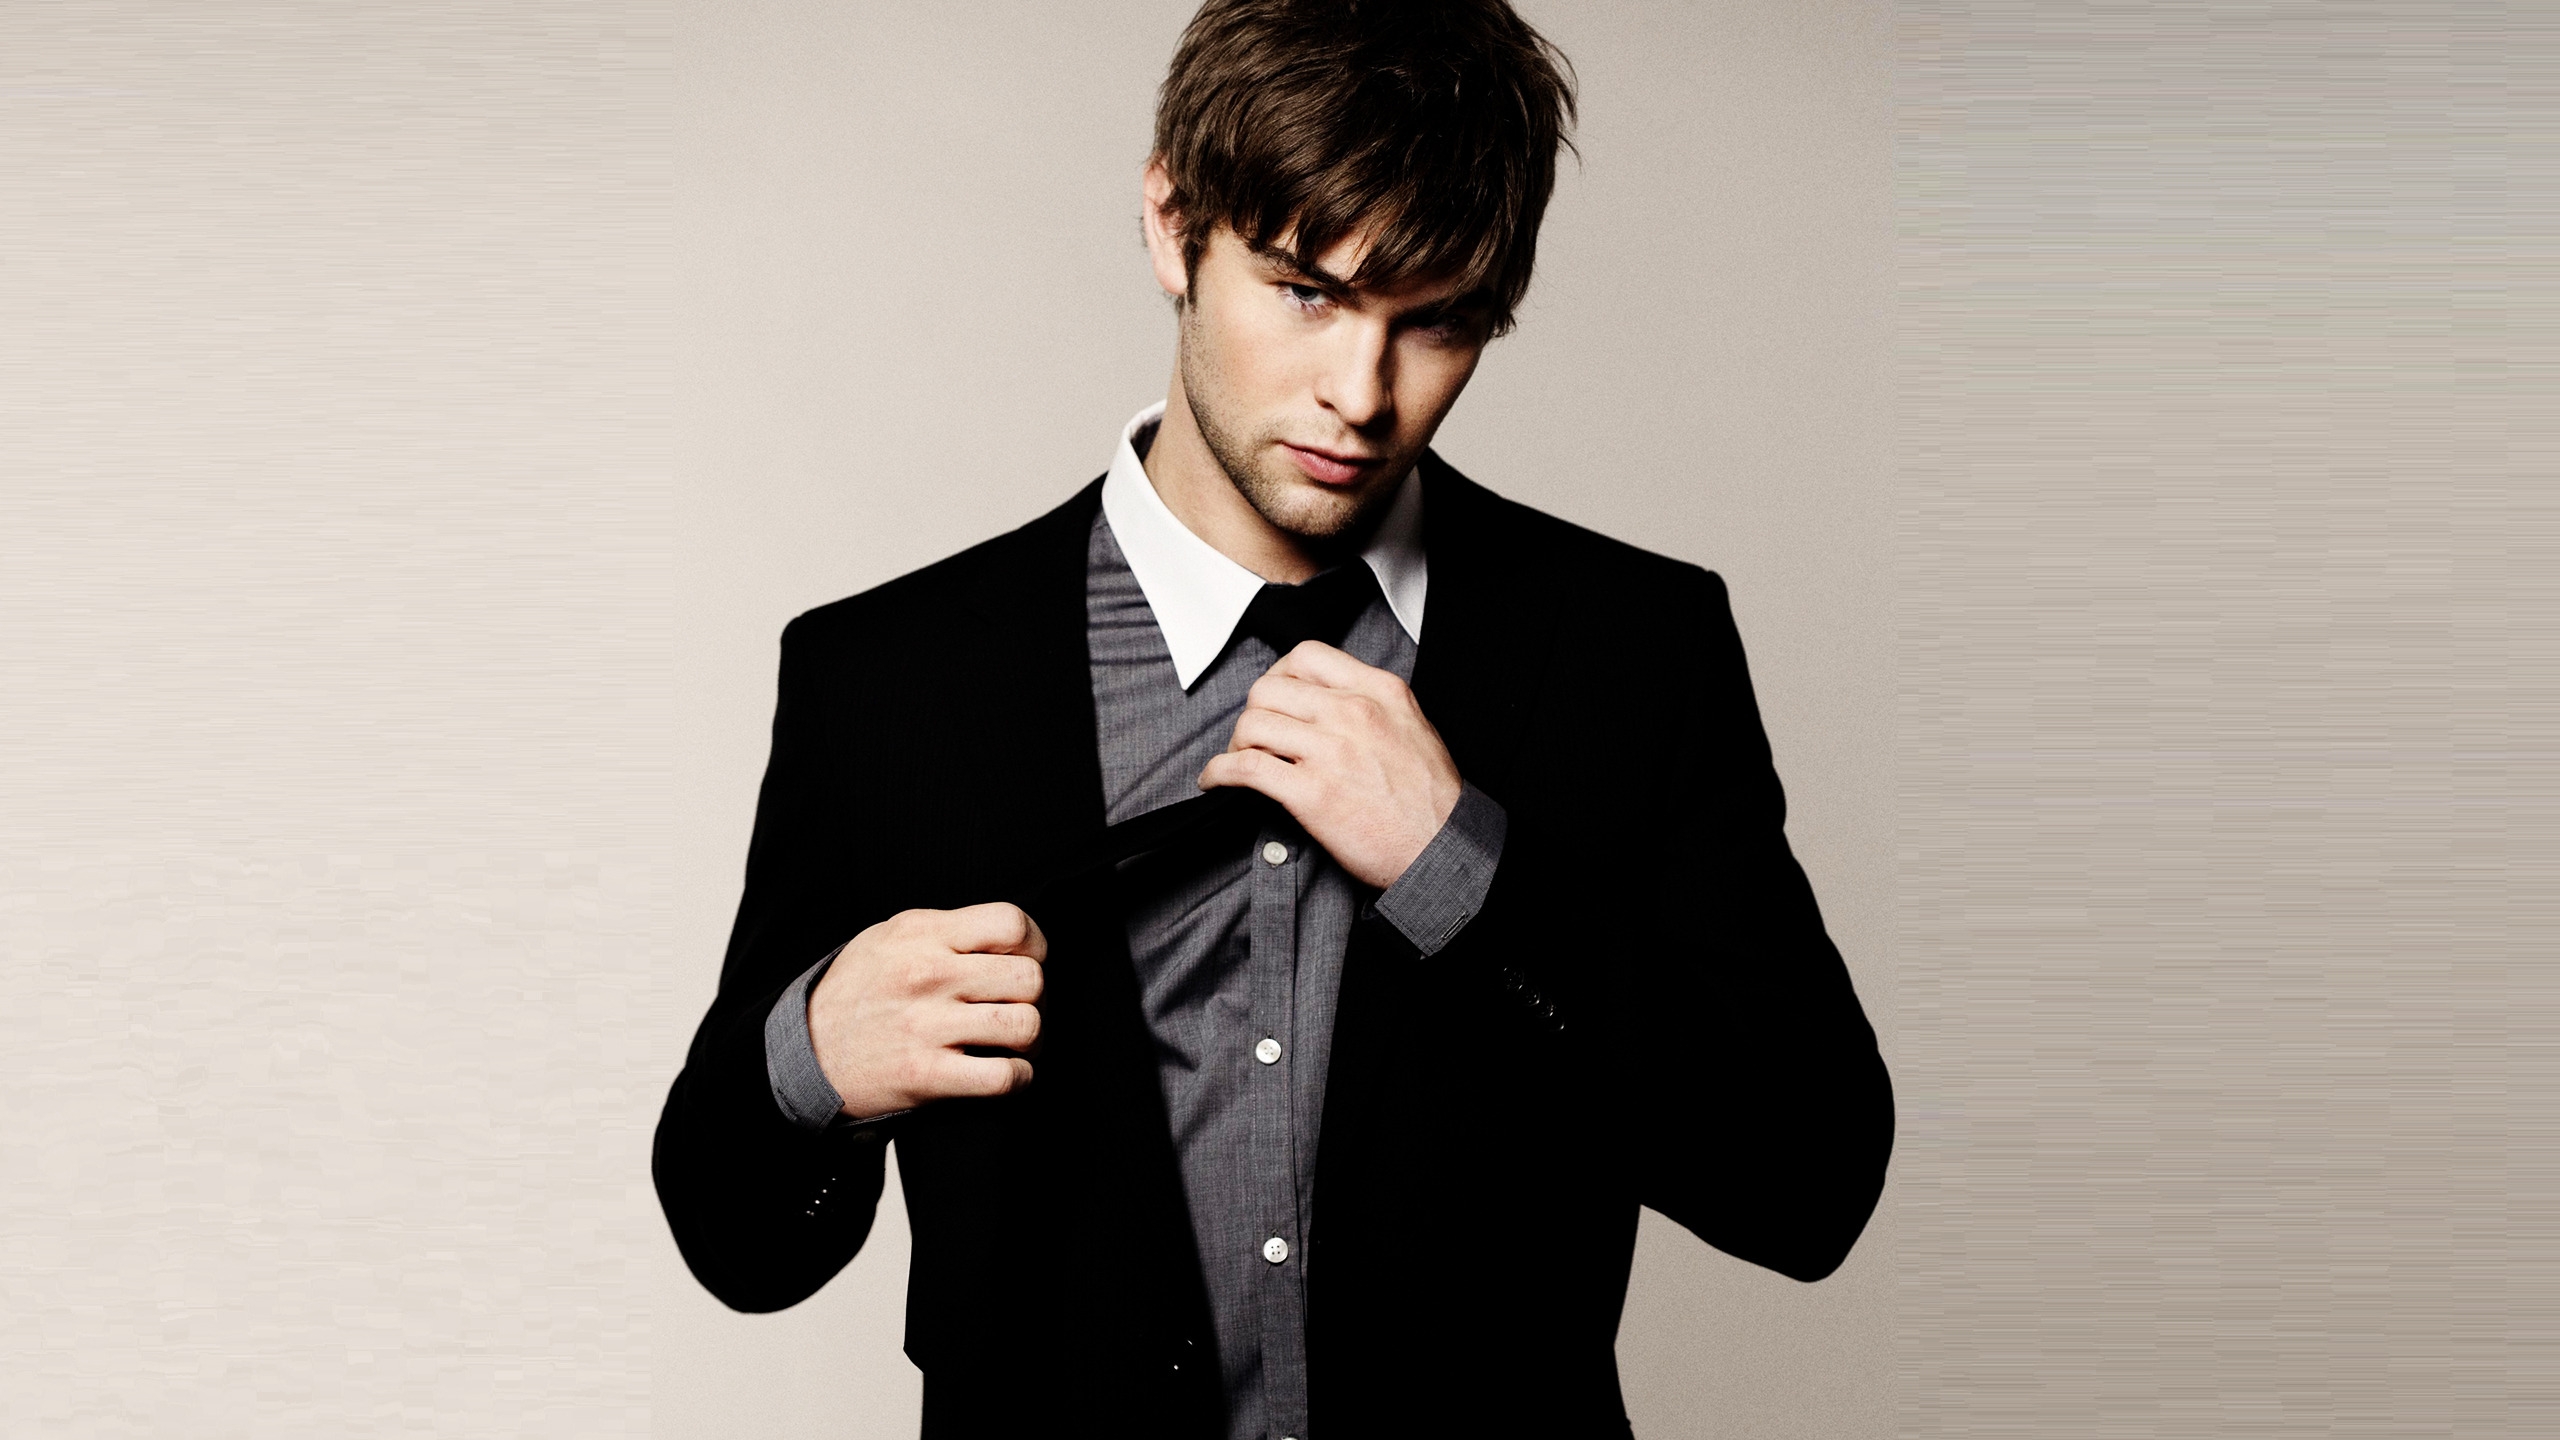 Chace Crawford Casual Look for 2560x1440 HDTV resolution